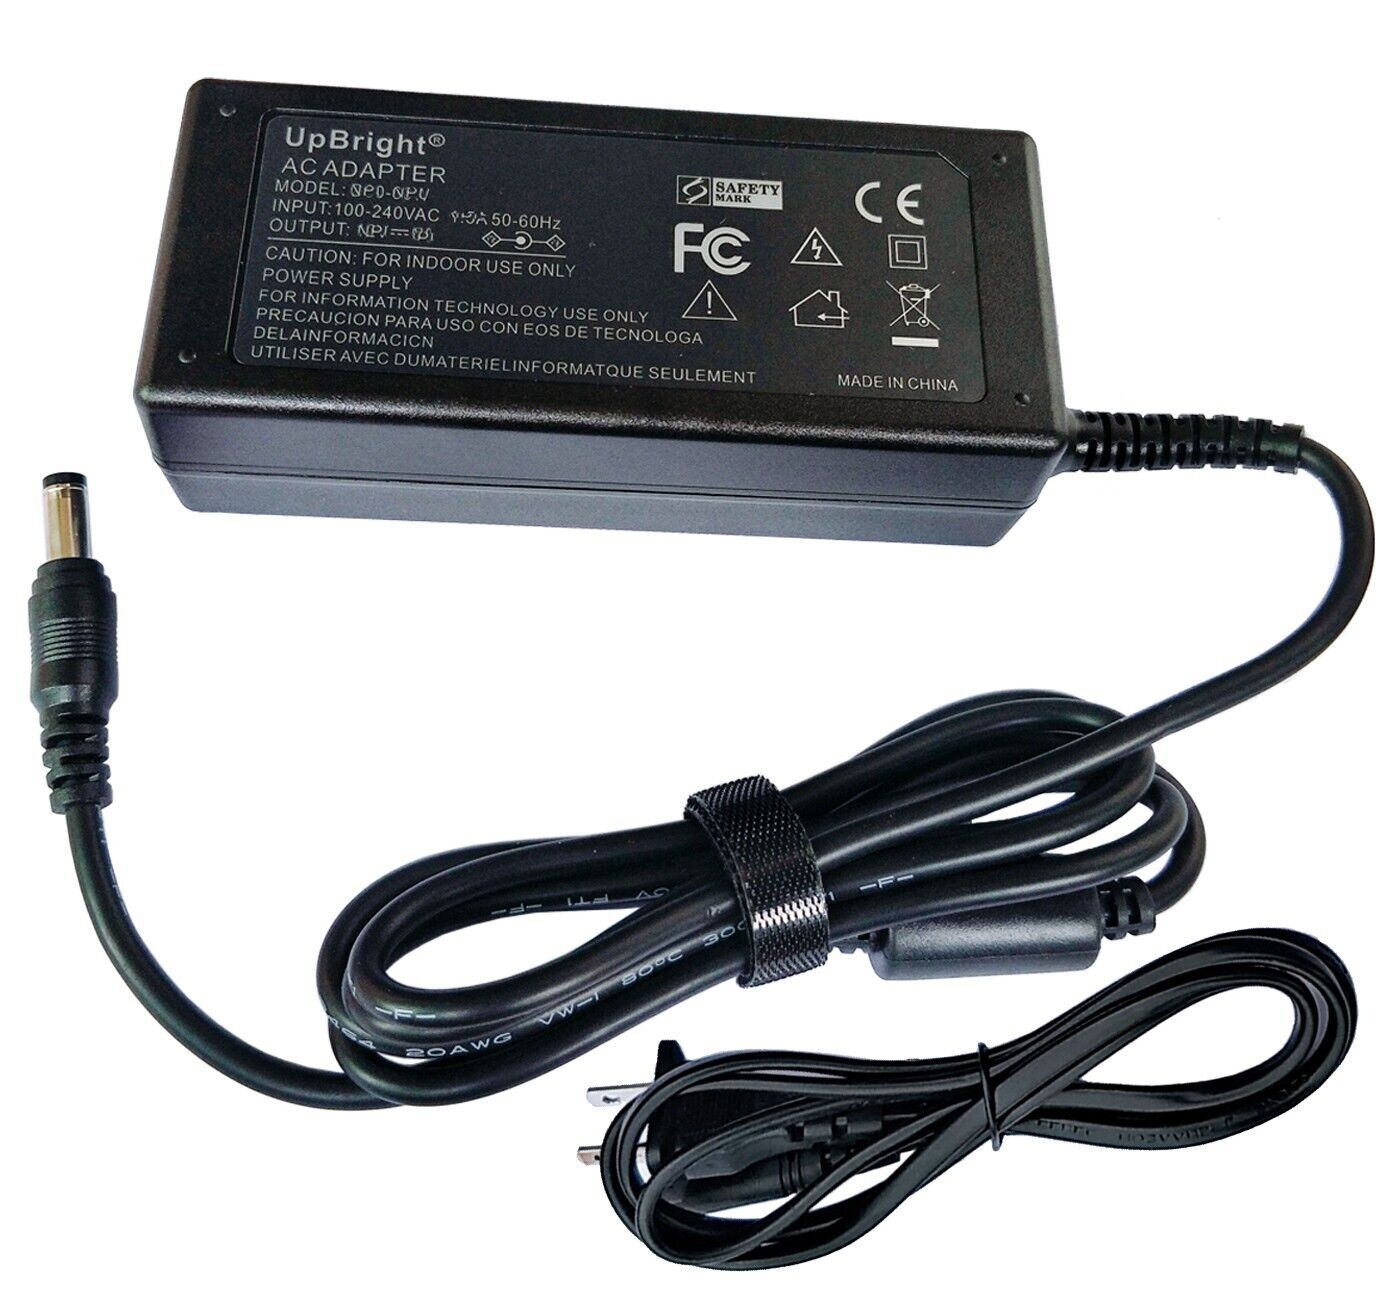 12V AC Adapter For Sony SBAC-US10 SxS Memory Card USB Reader Writer AC-ES1230K